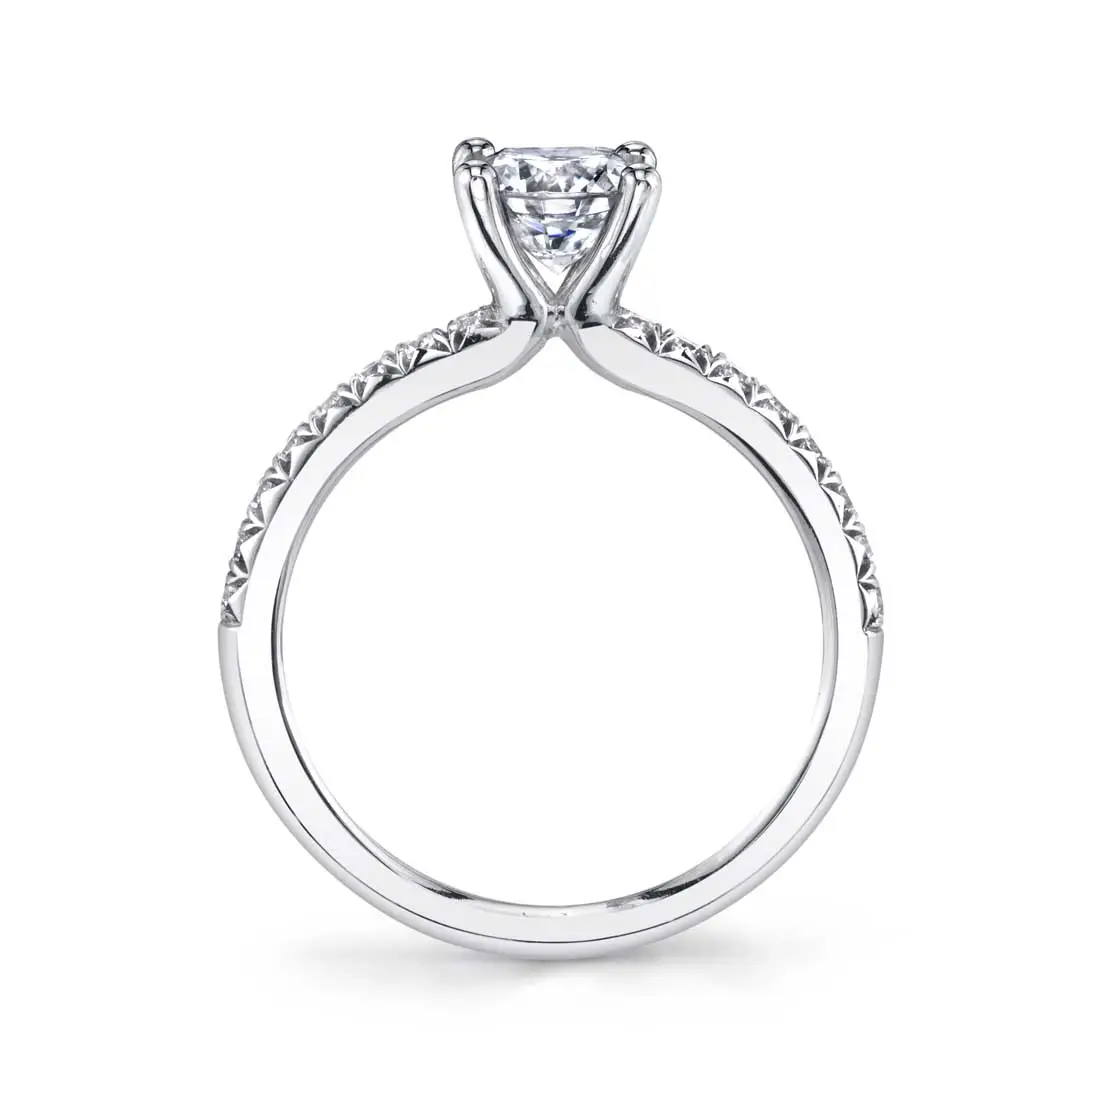 Profile Image of a Classic Engagement Ring